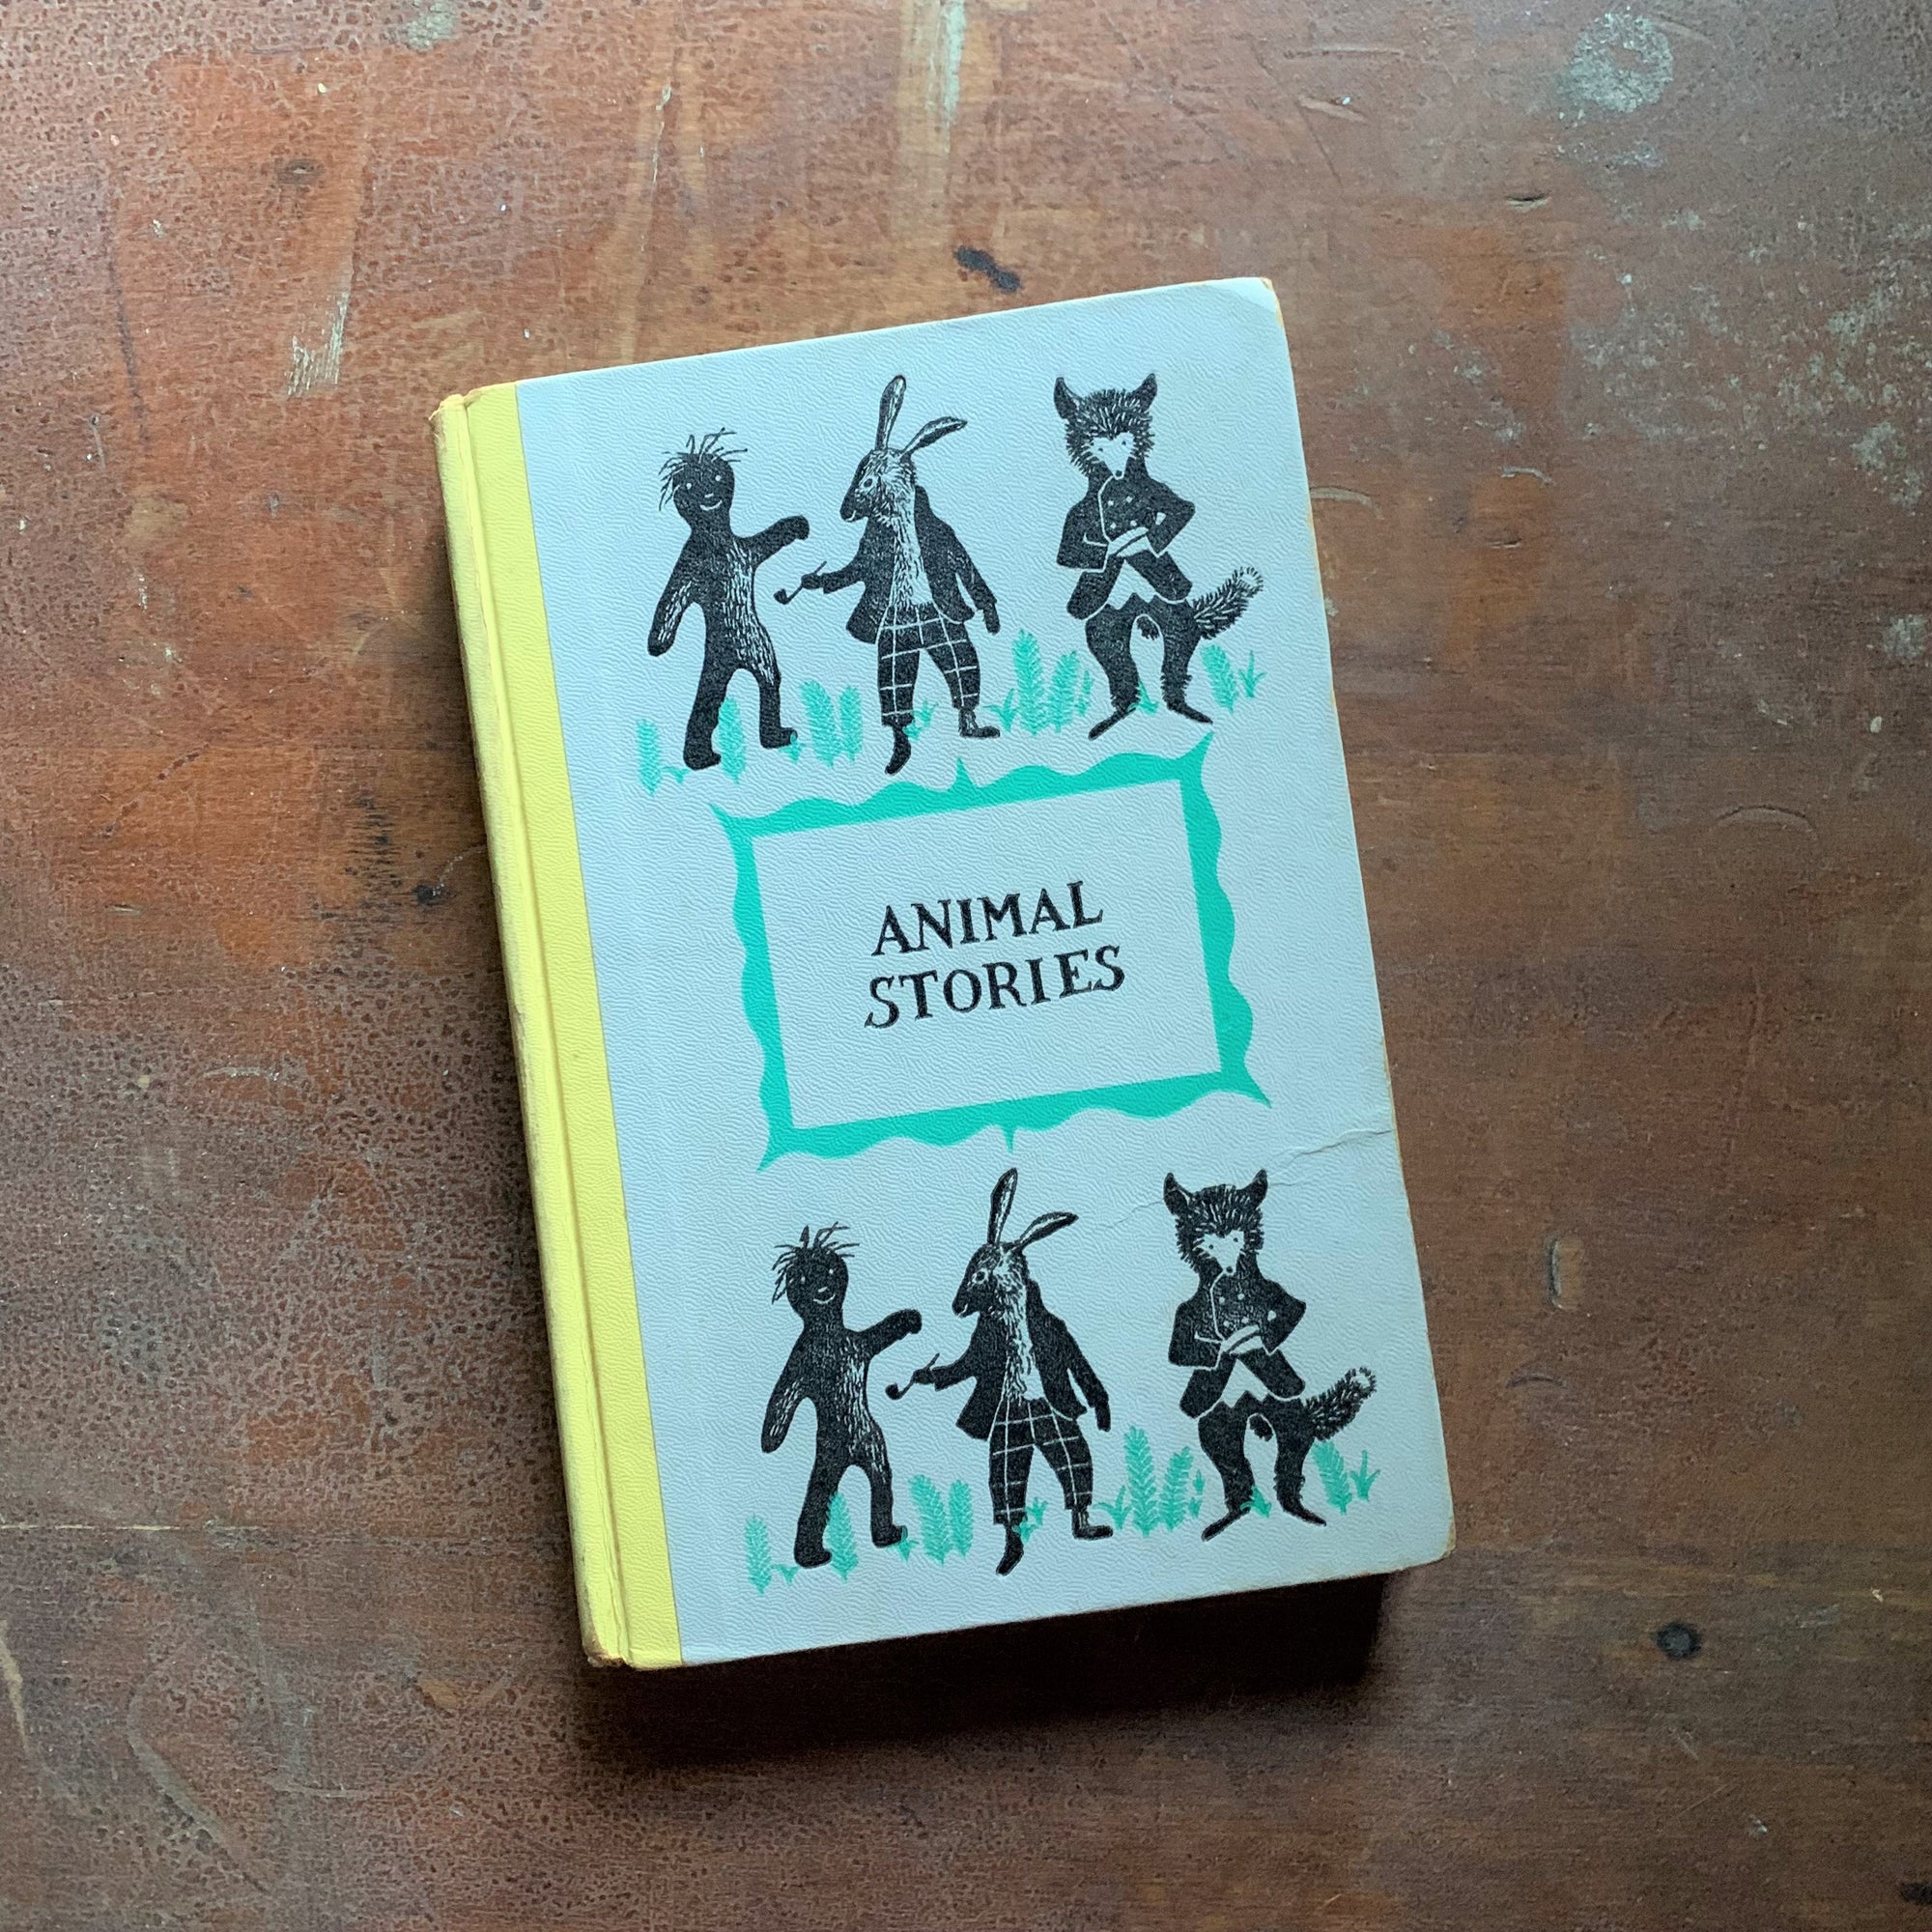 Animal Stories - A Junior Deluxe Editions Vintage Children's Book - Front Cover